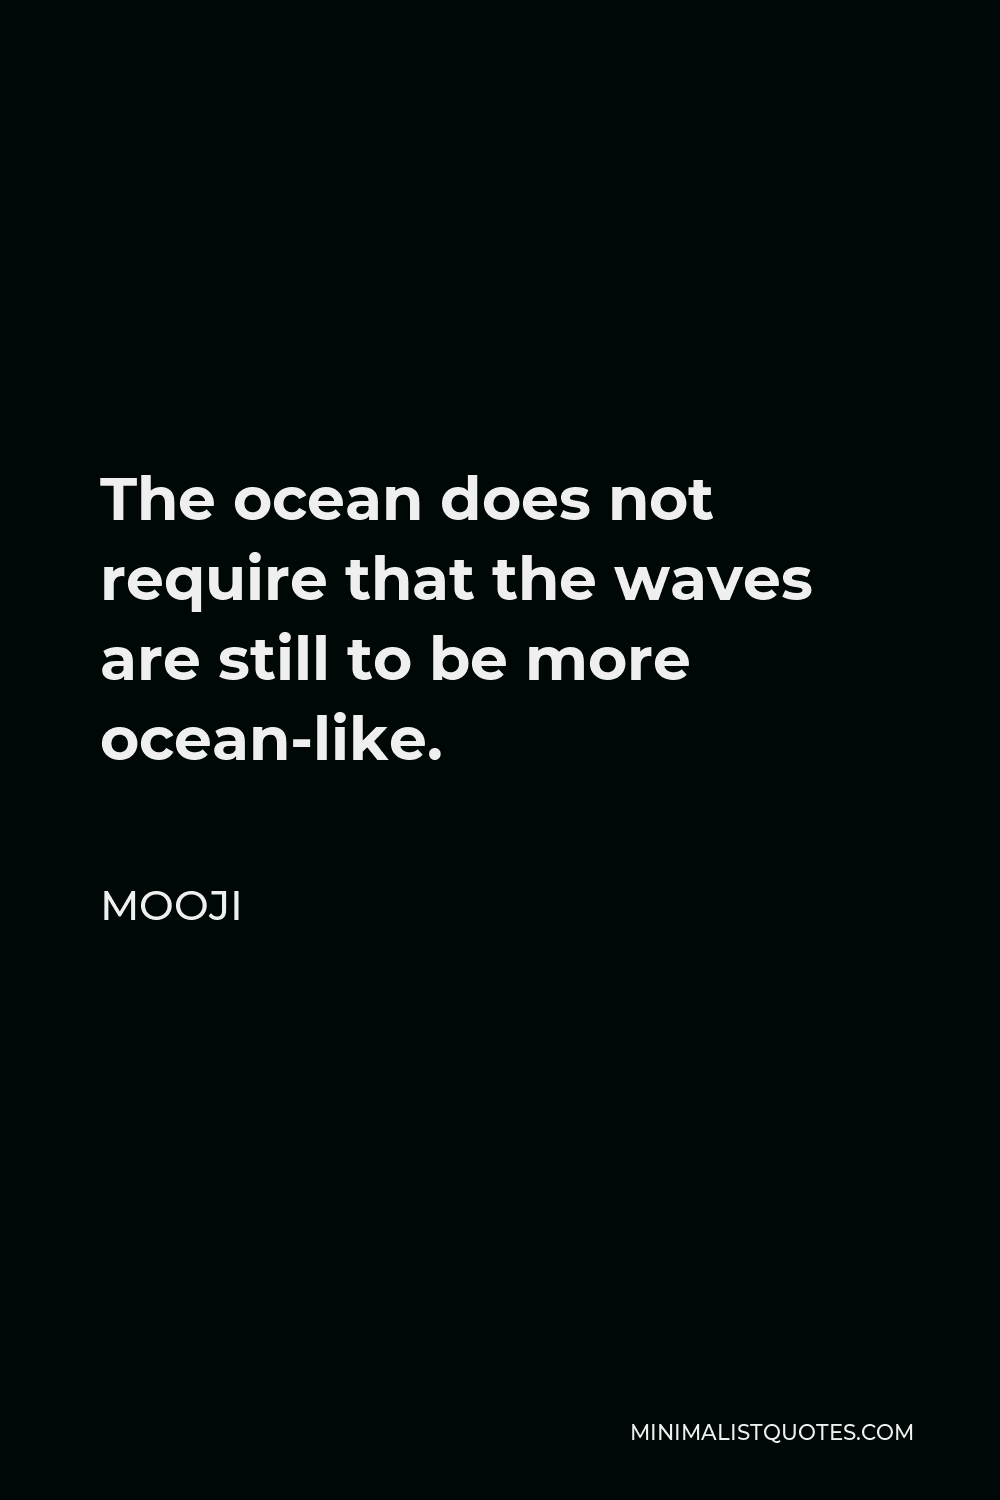 Mooji Quote - The ocean does not require that the waves are still to be more ocean-like.